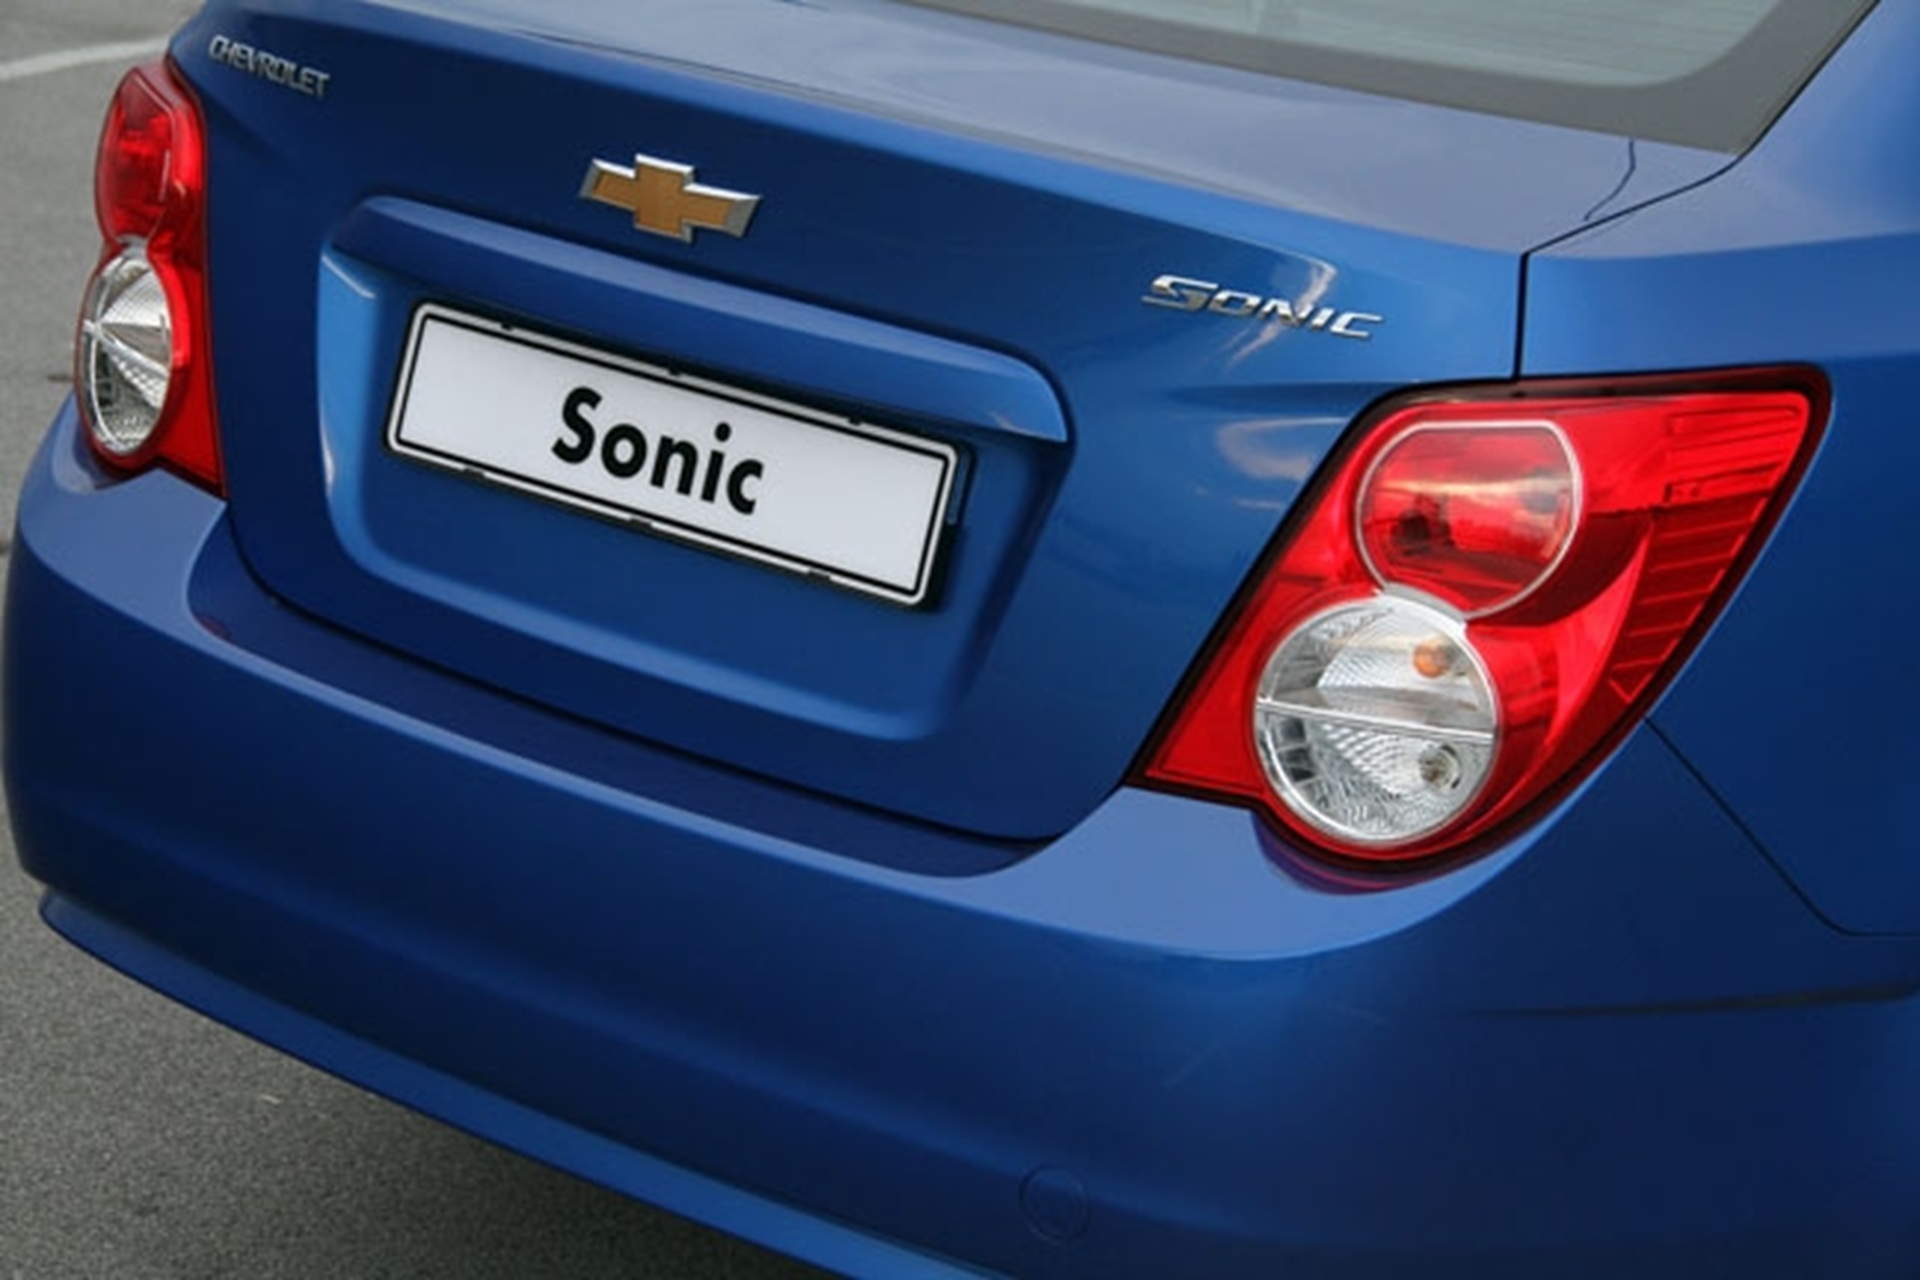 GMSA Extends Chevrolet Sonic Range with Sedan Variant and Diesel Power for Hatch